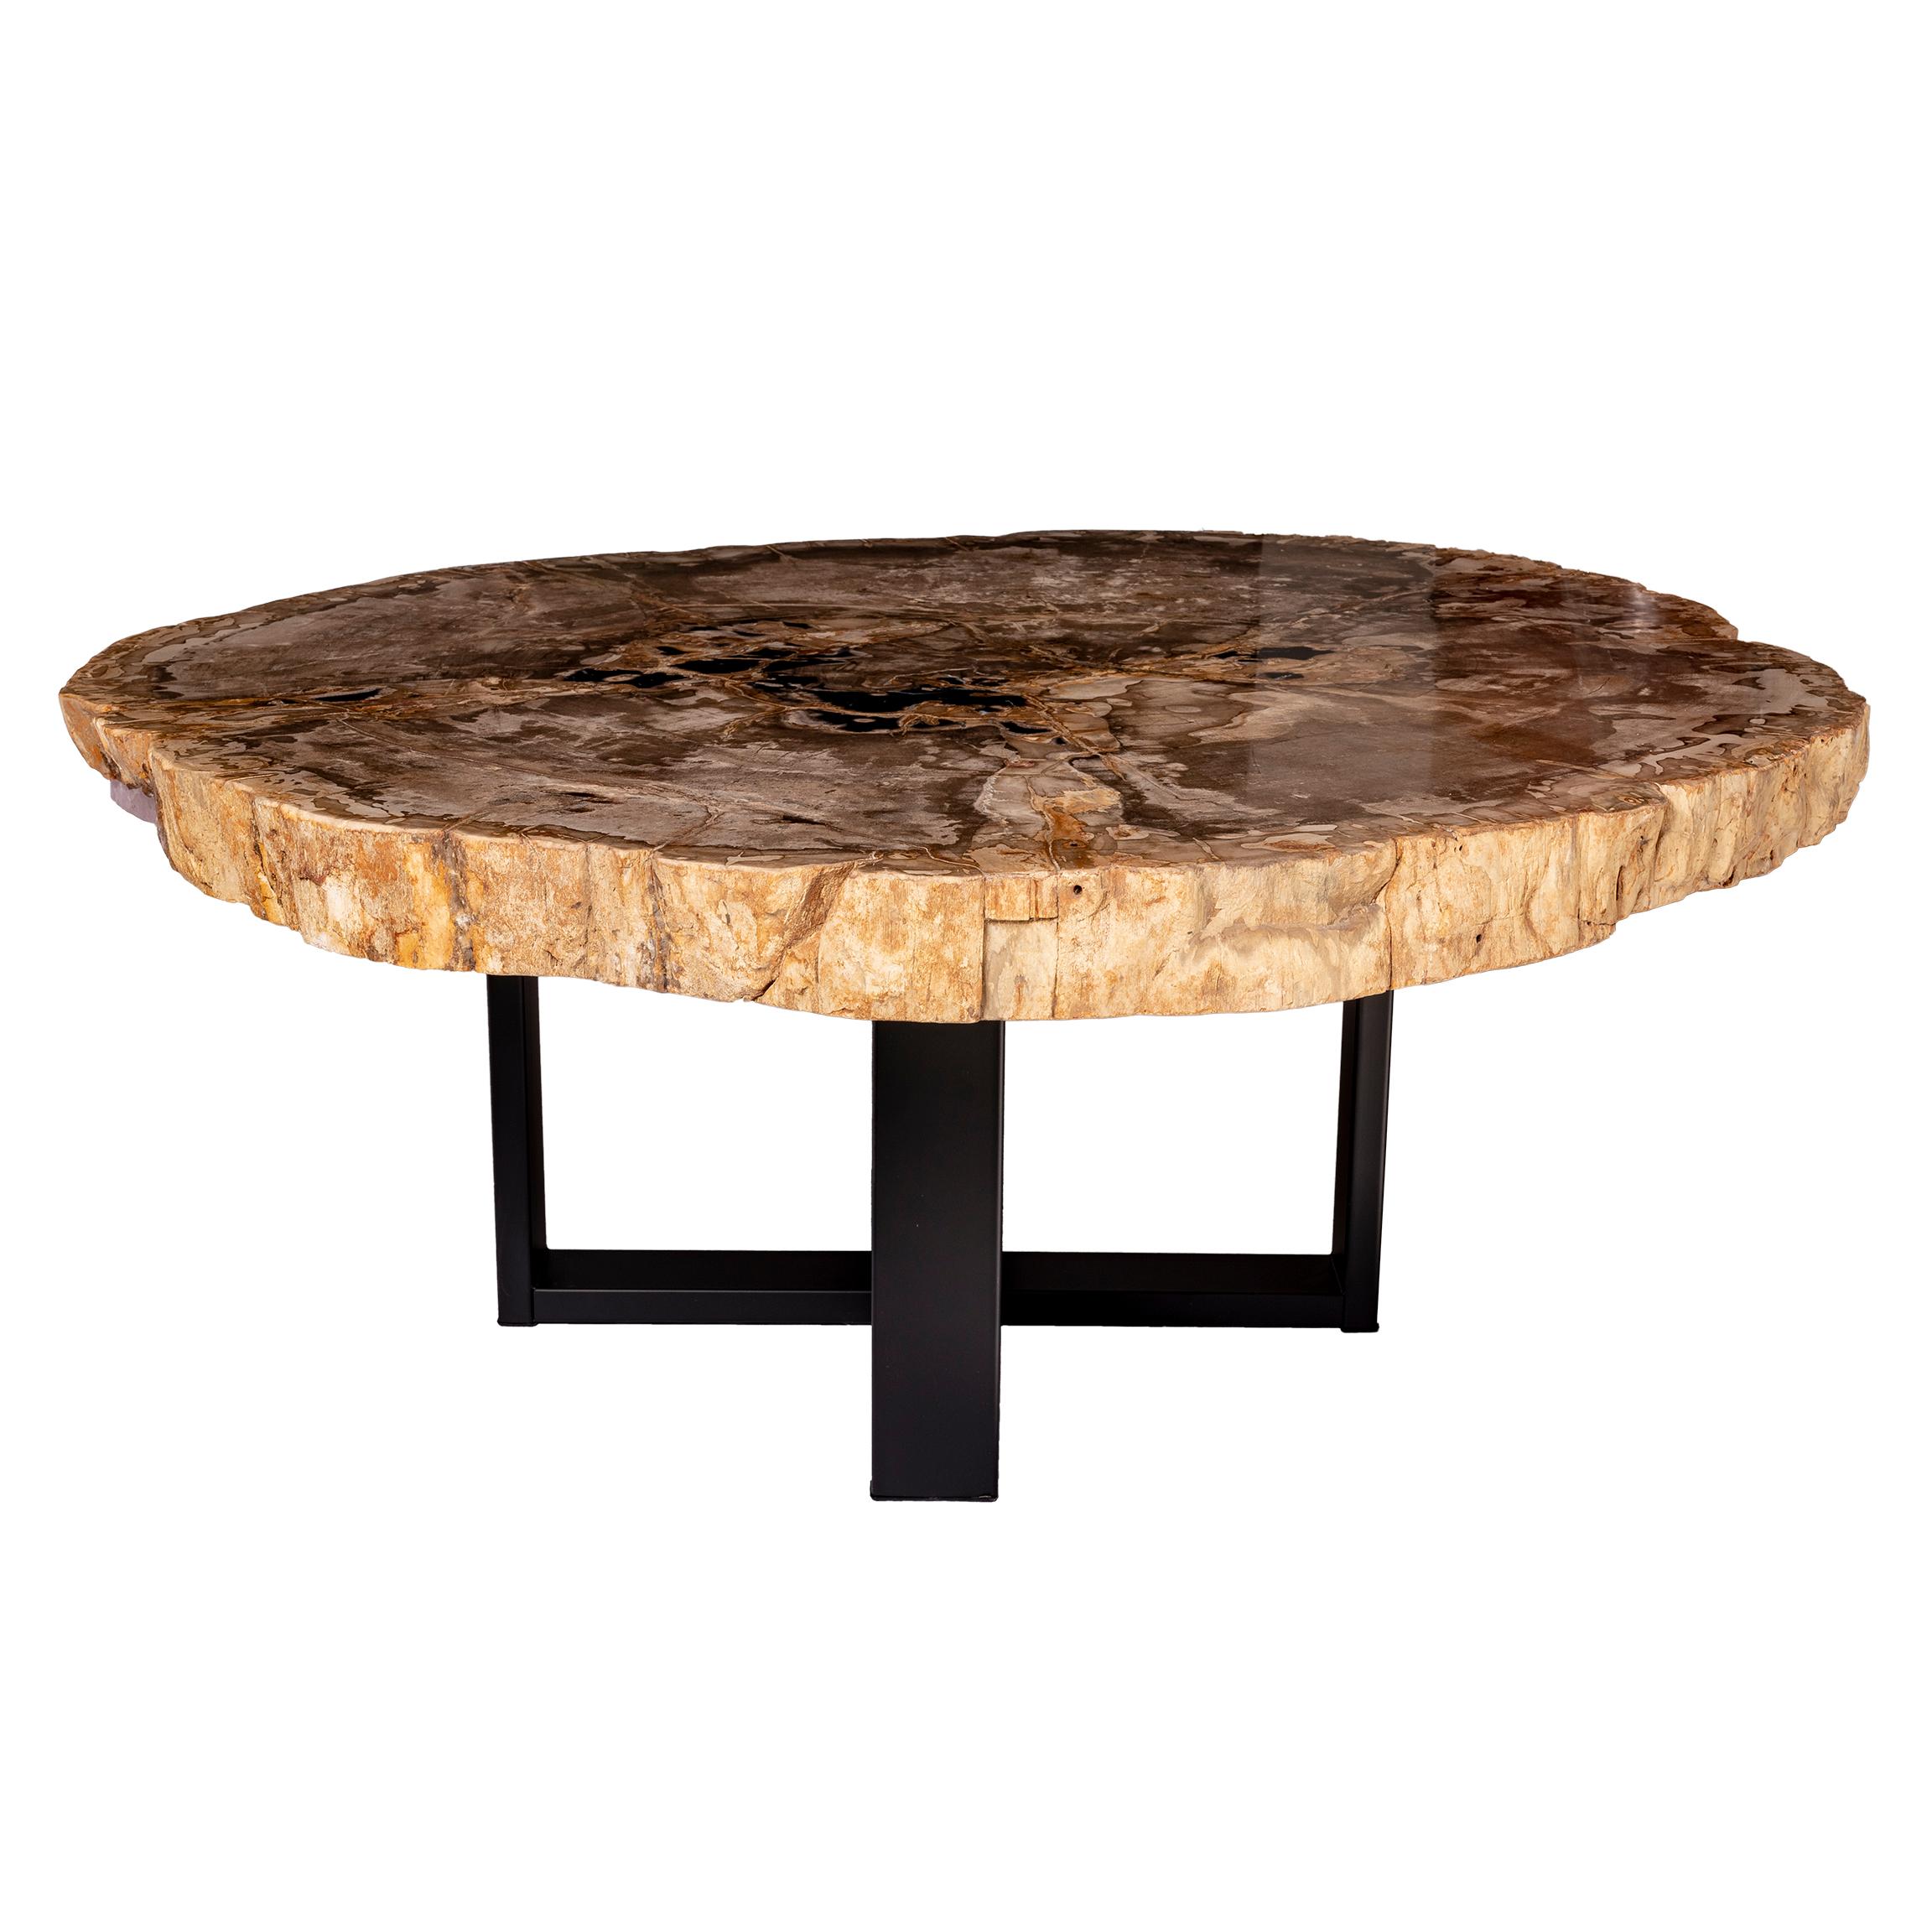 Polished Center of Coffee Table, Natural Circular Shape, Petrified Wood with Metal Base